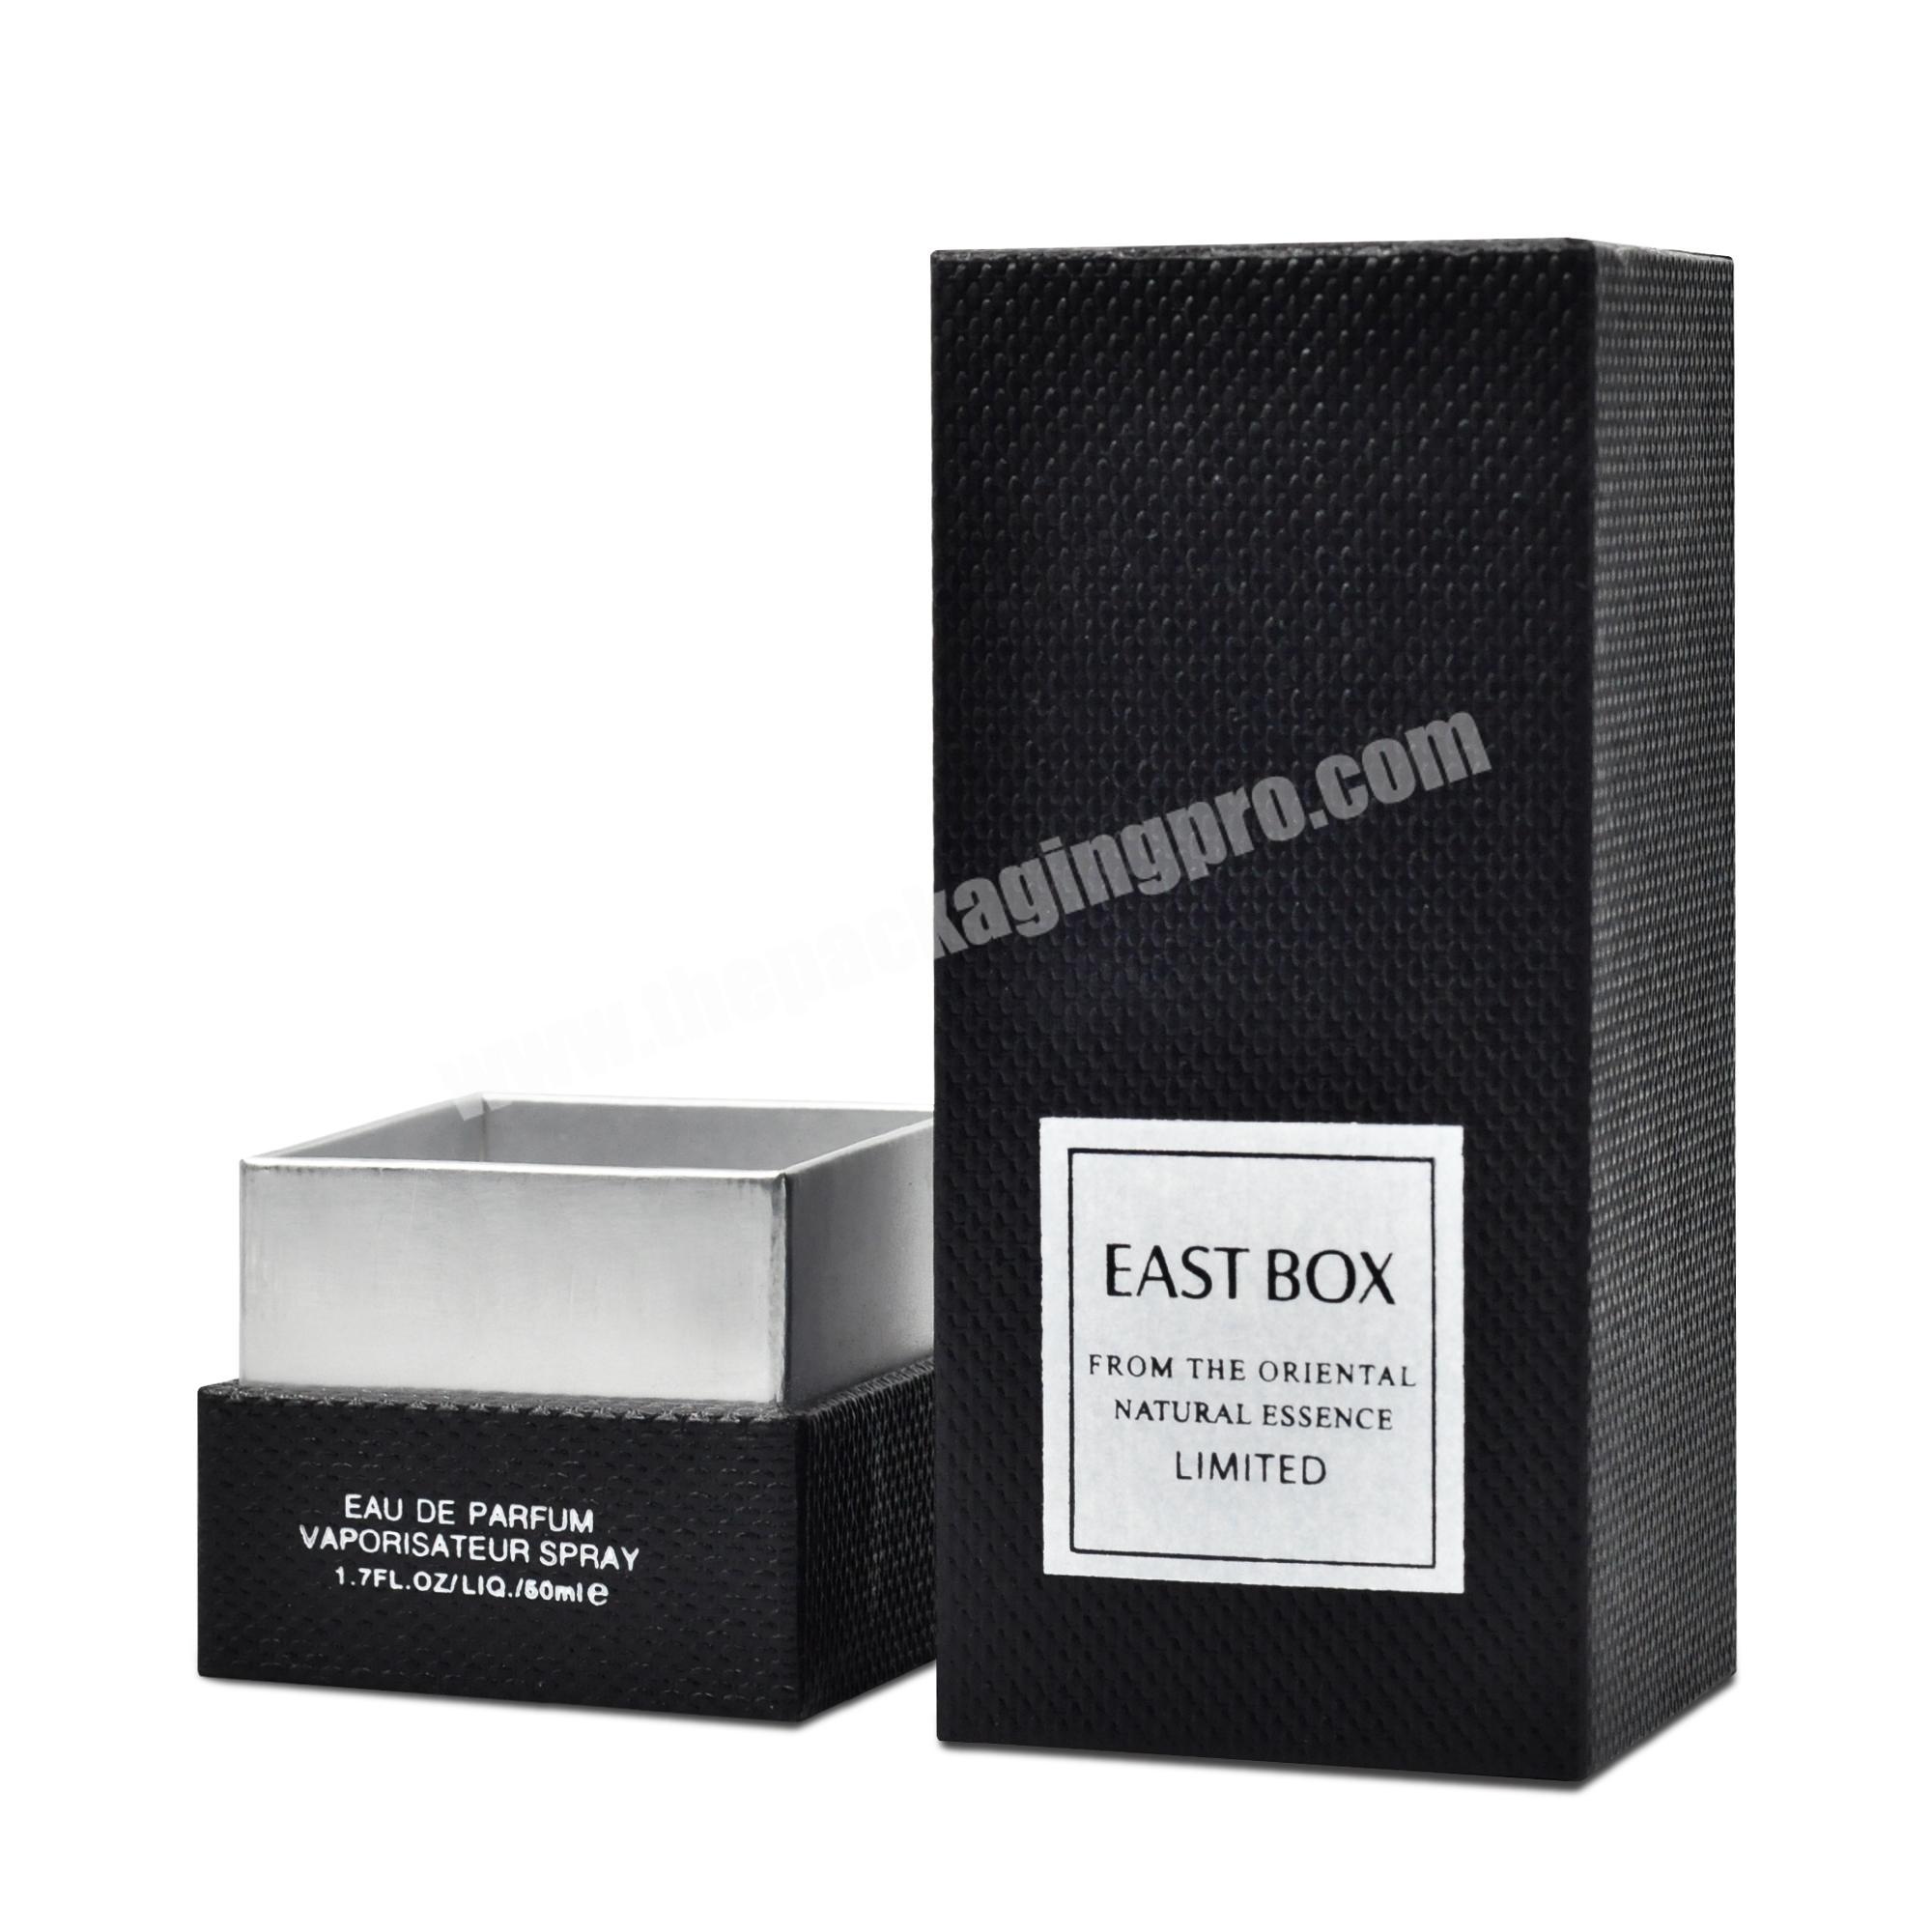 Up-to-date styling bottle box essential oil bottle box Personalized design box